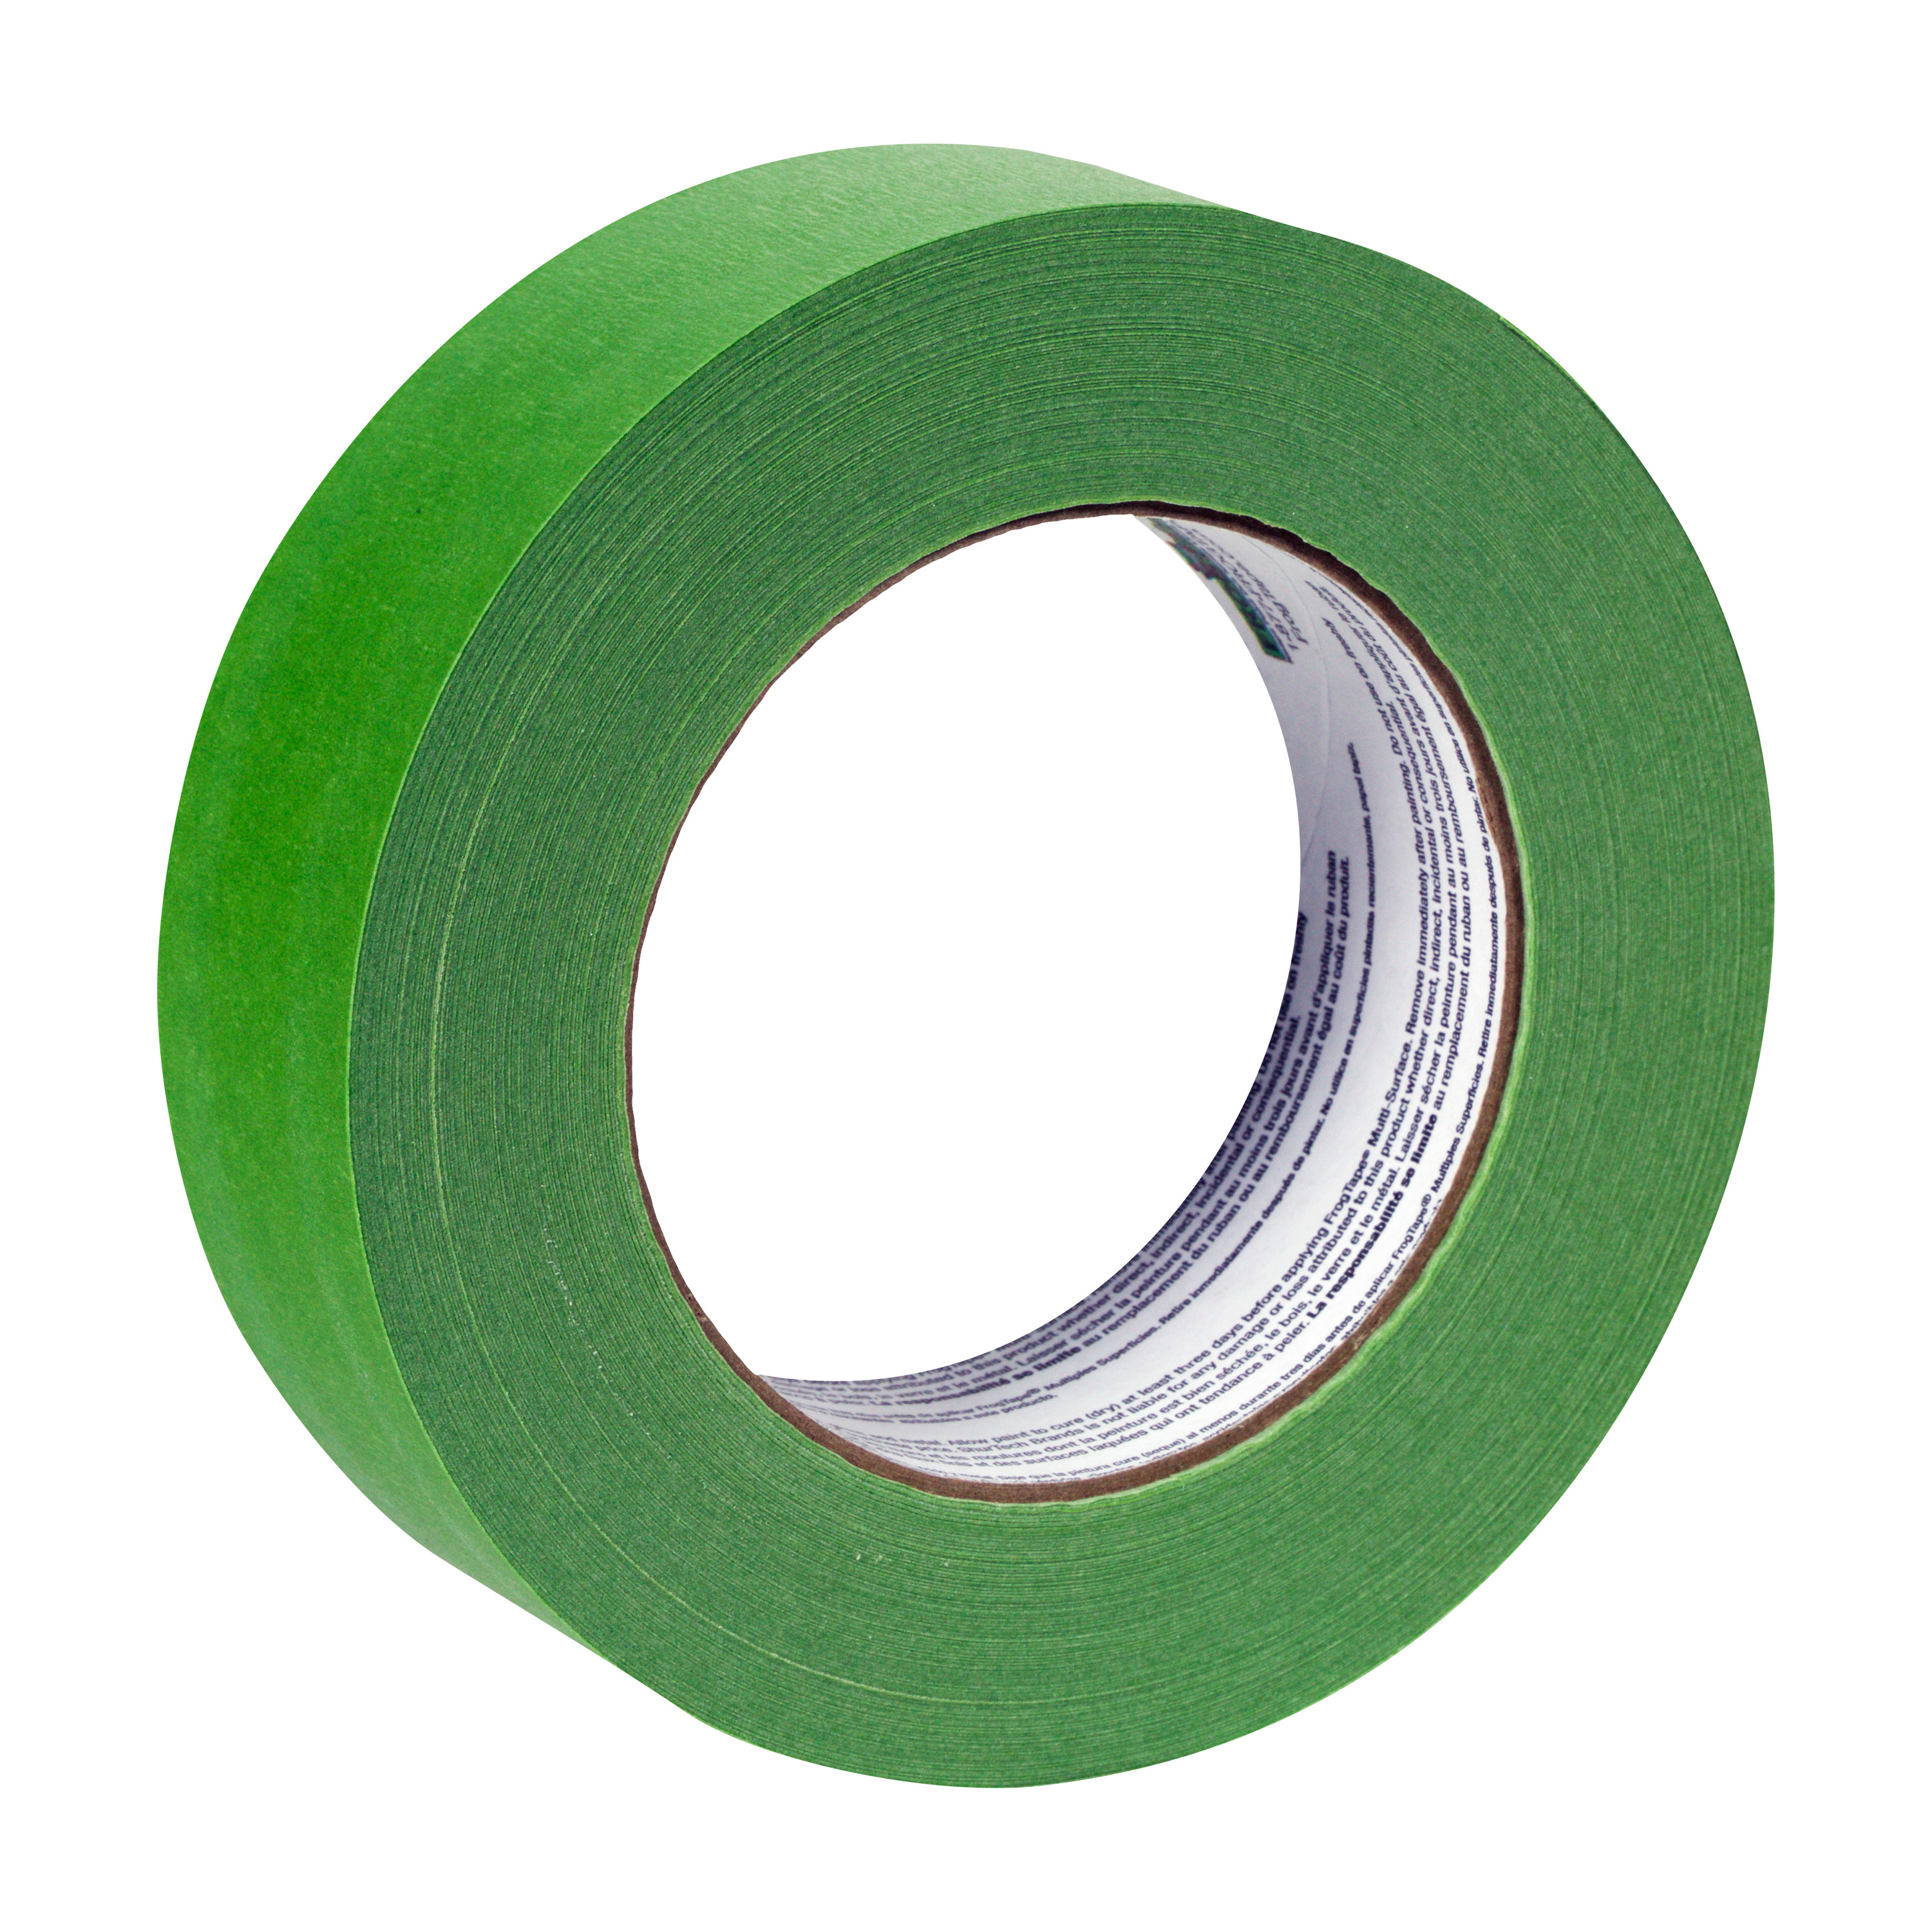 FrogTape 0.94 in. x 60 yd. Green Multi-Surface Painter's Tape - image 3 of 10